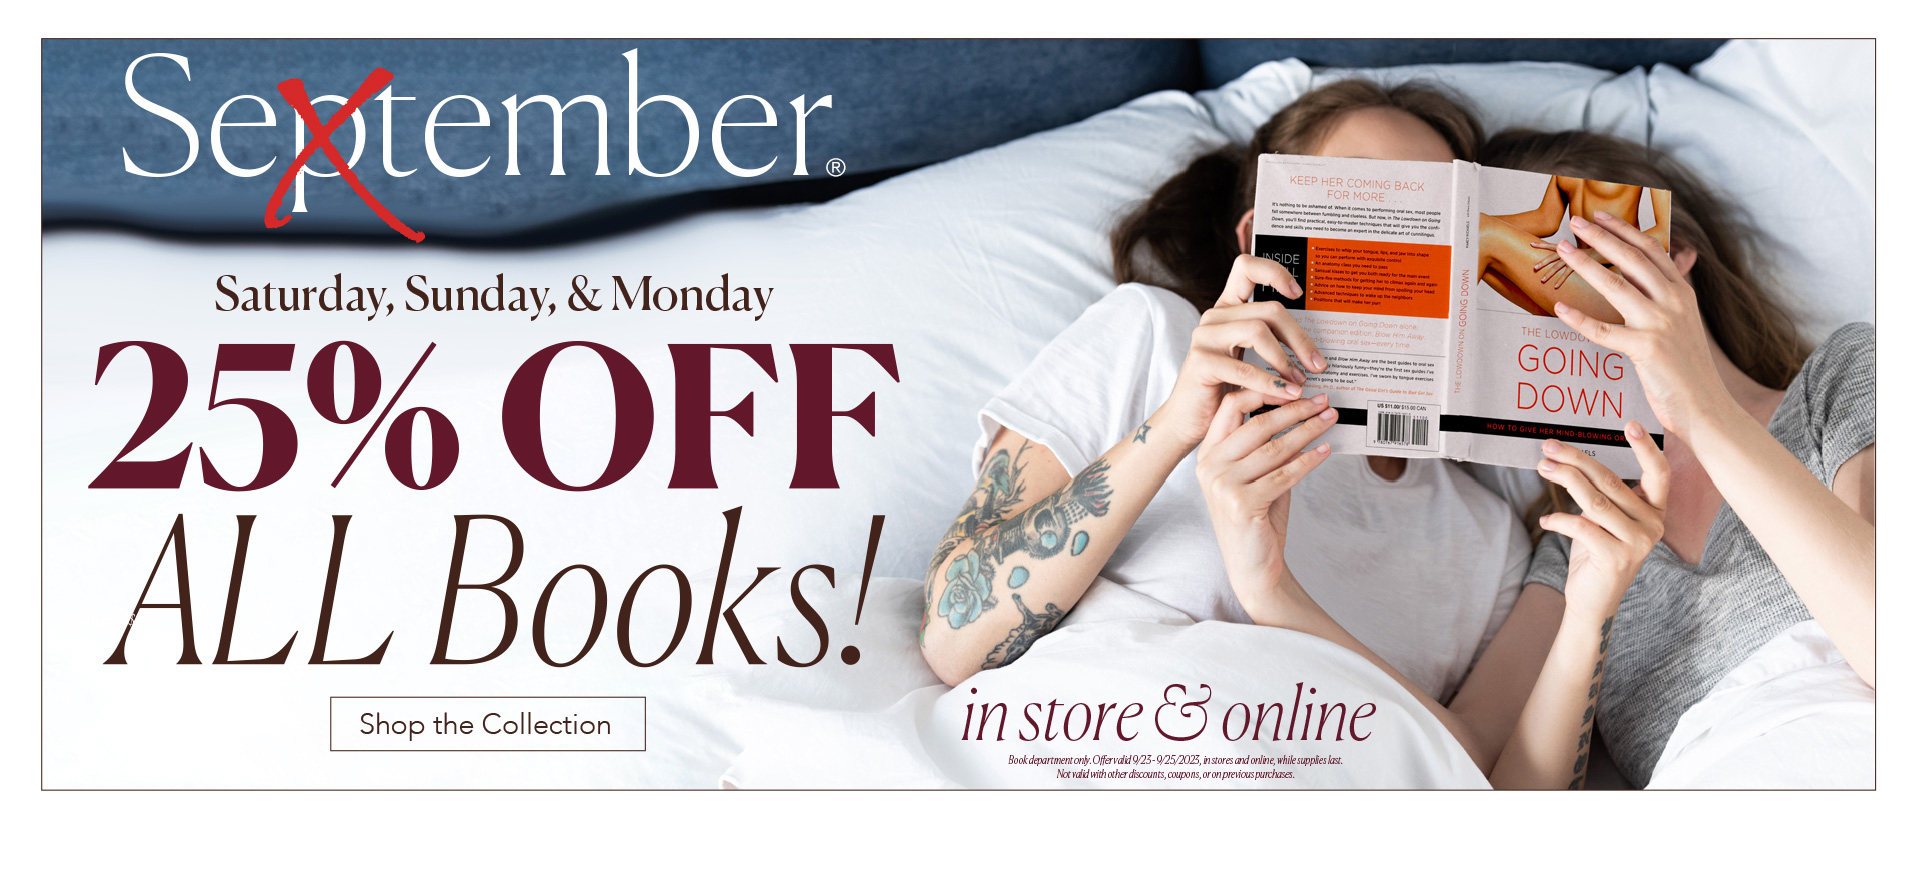 Sextember - Saturday, Sunday, & Monday 25% OFF ALL books! - in store & online - Shop the Collection